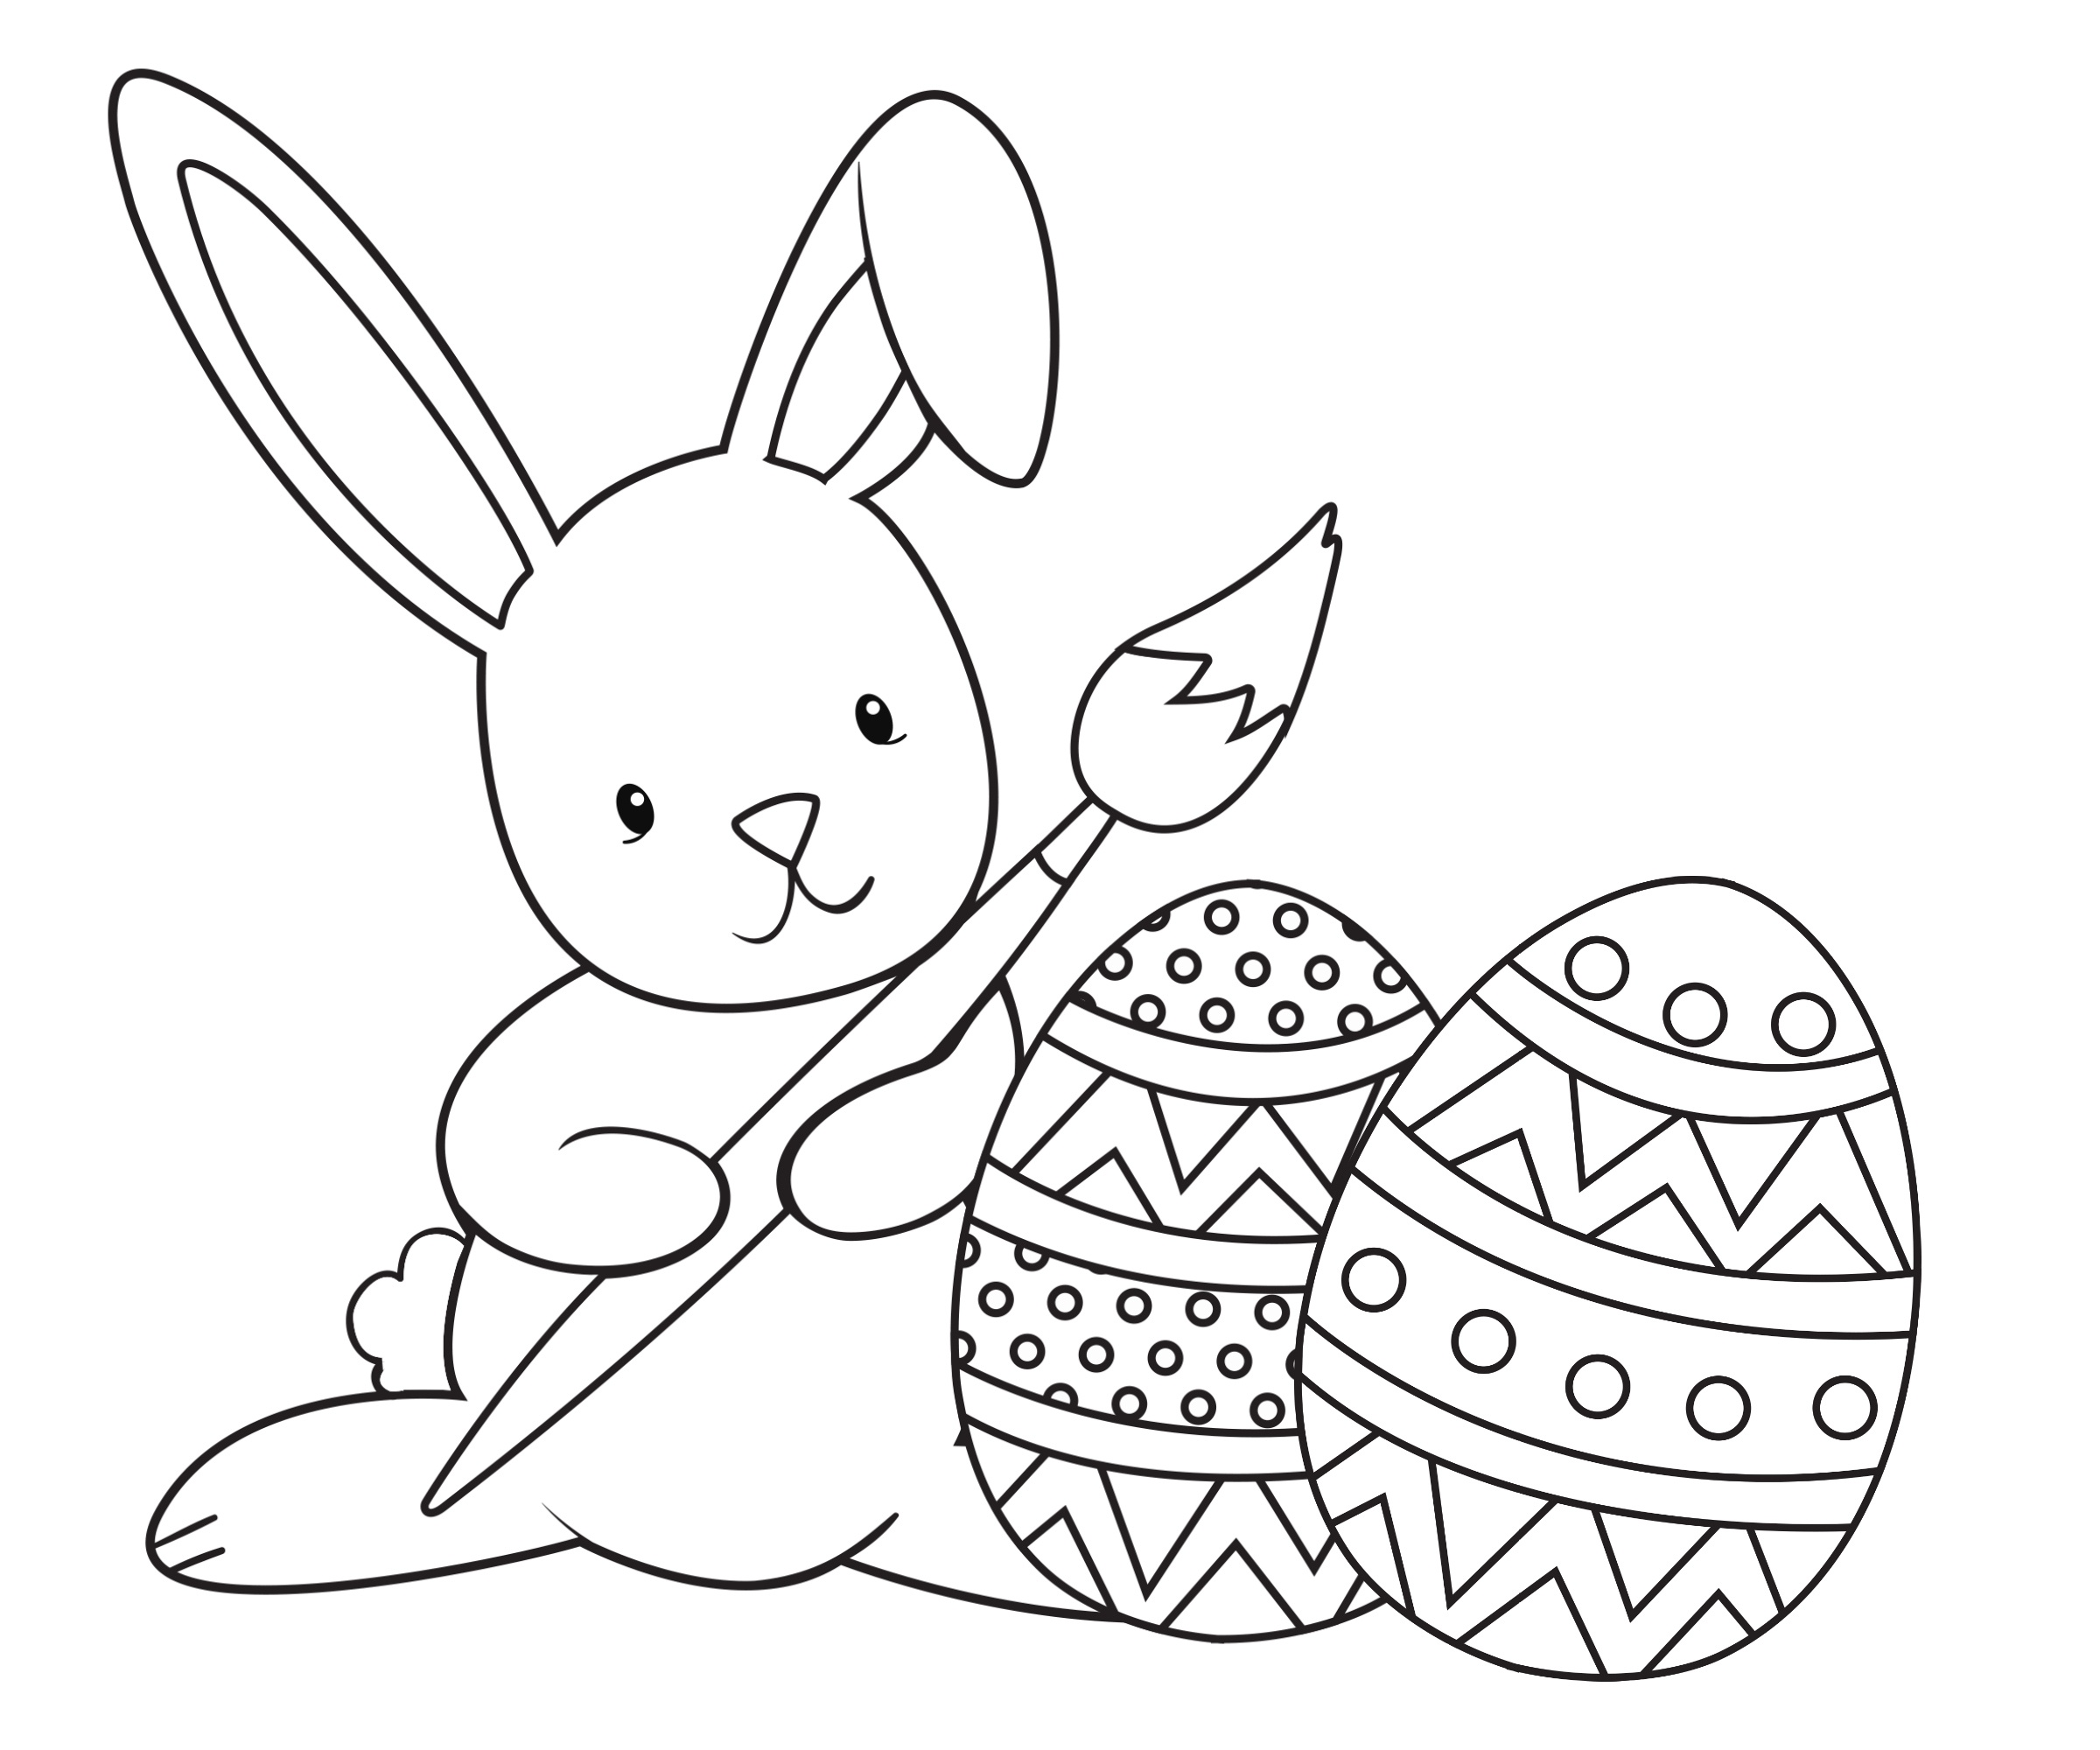 Easter Coloring Pages For Kids - Crazy Little Projects - Free Printable Easter Colouring Sheets